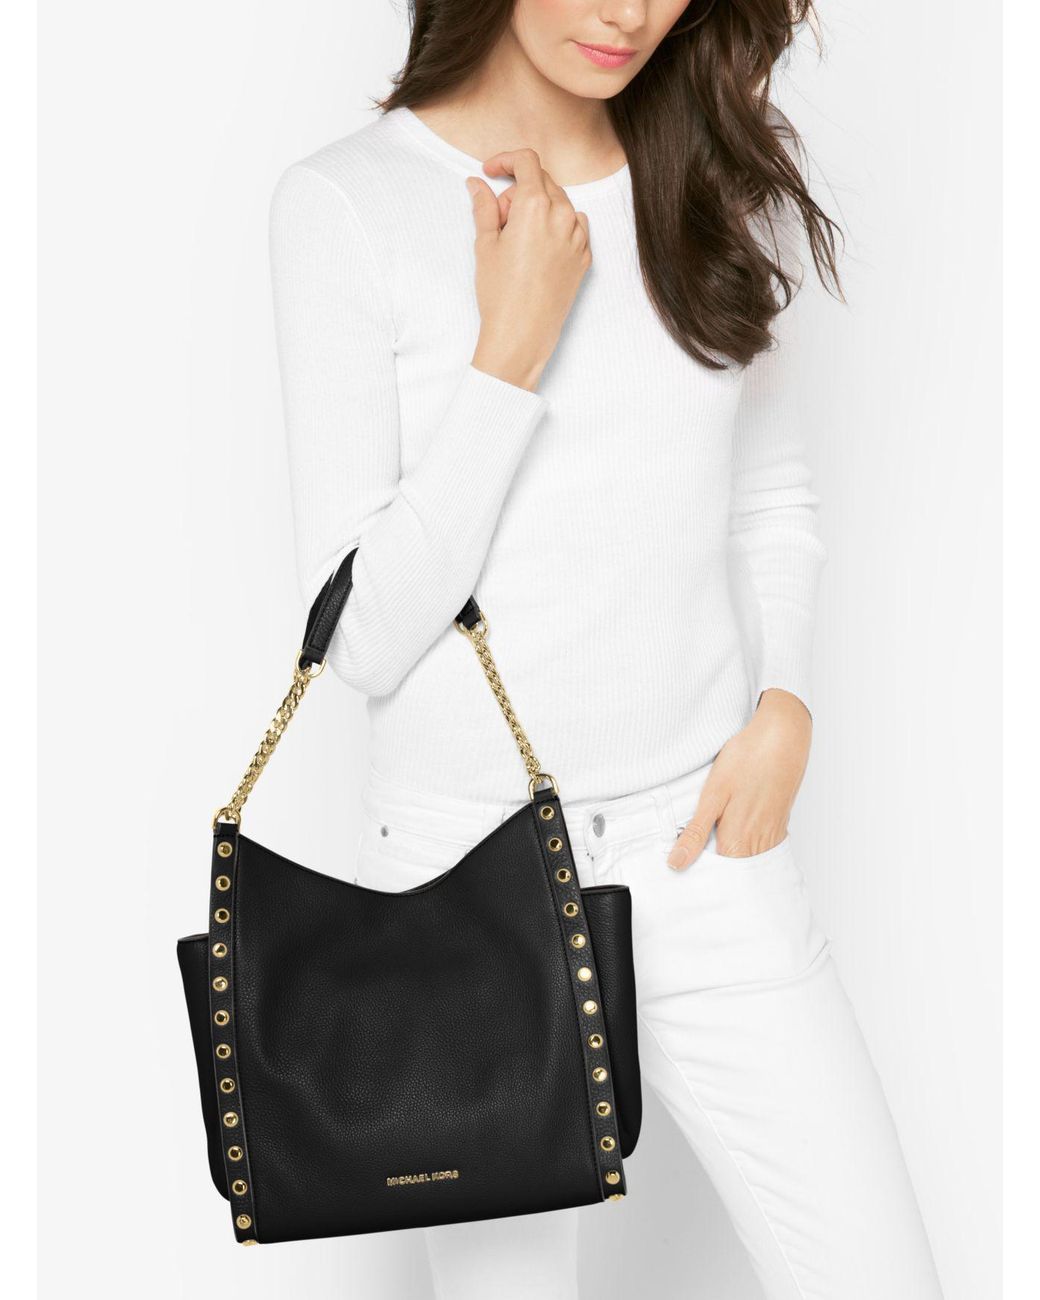 Michael Kors Newbury Studded Leather Chain Tote Bag in Black | Lyst